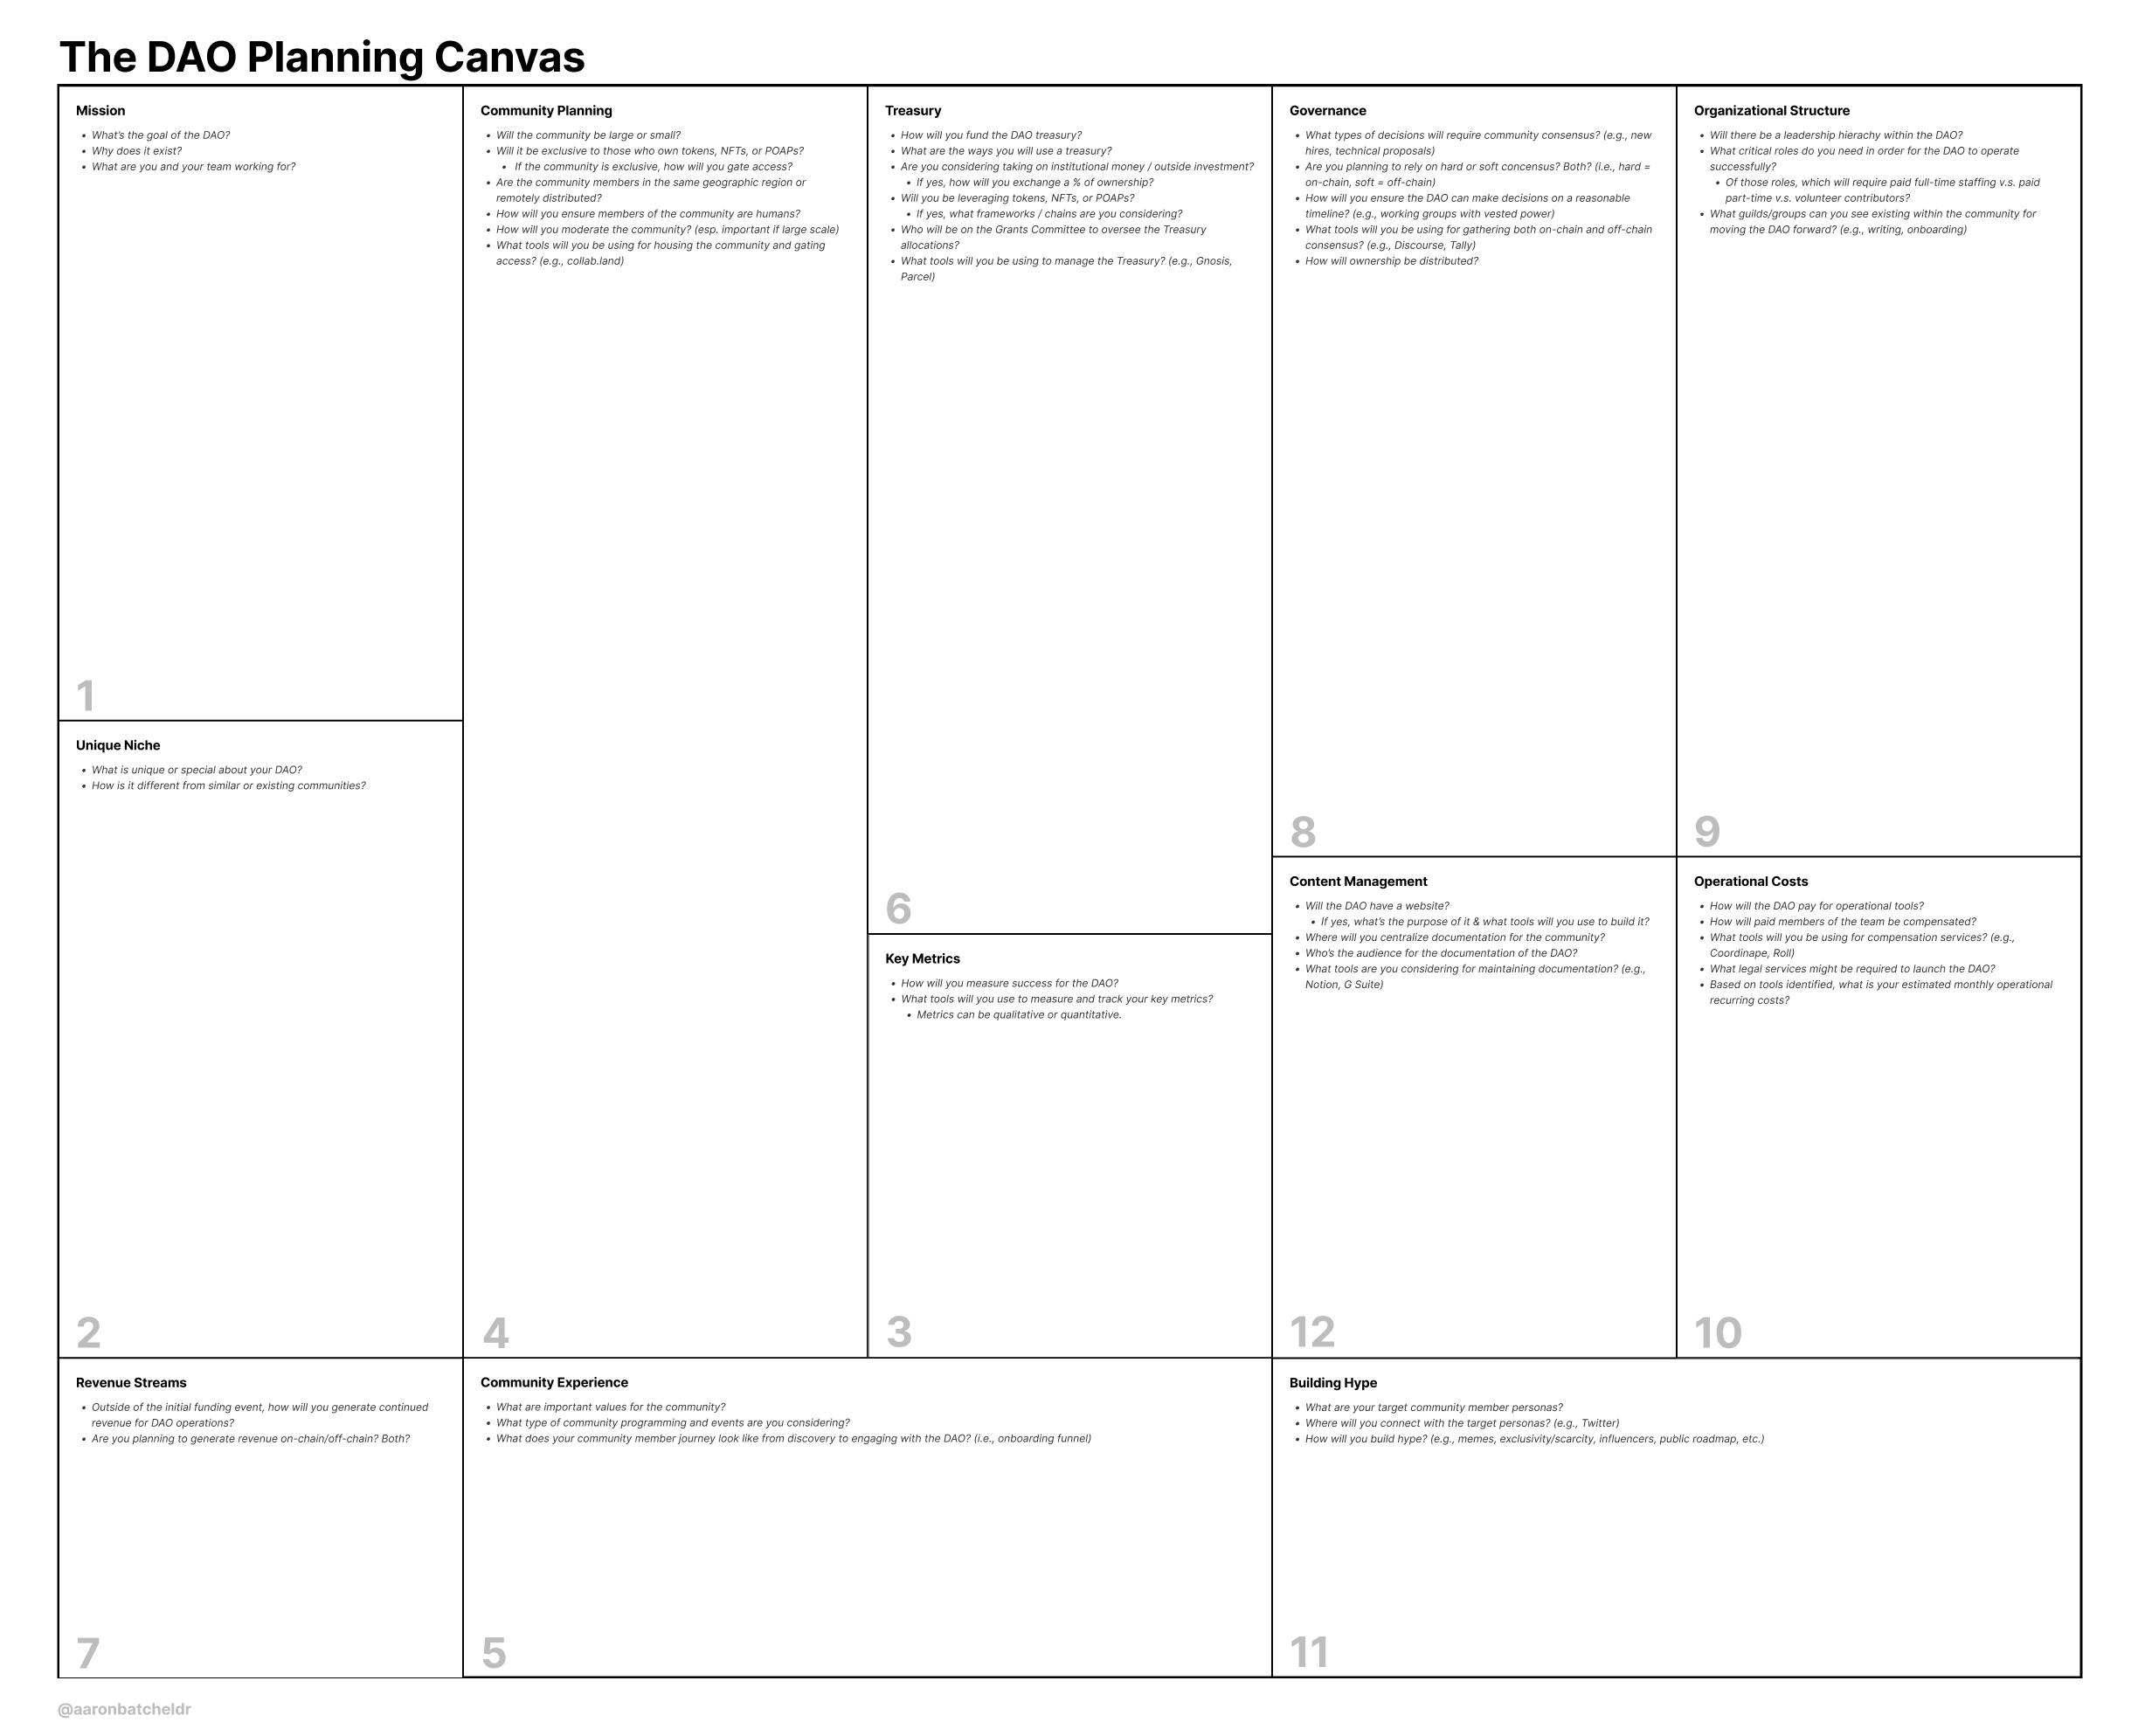 The DAO Planning Canvas v1.0, January 2022